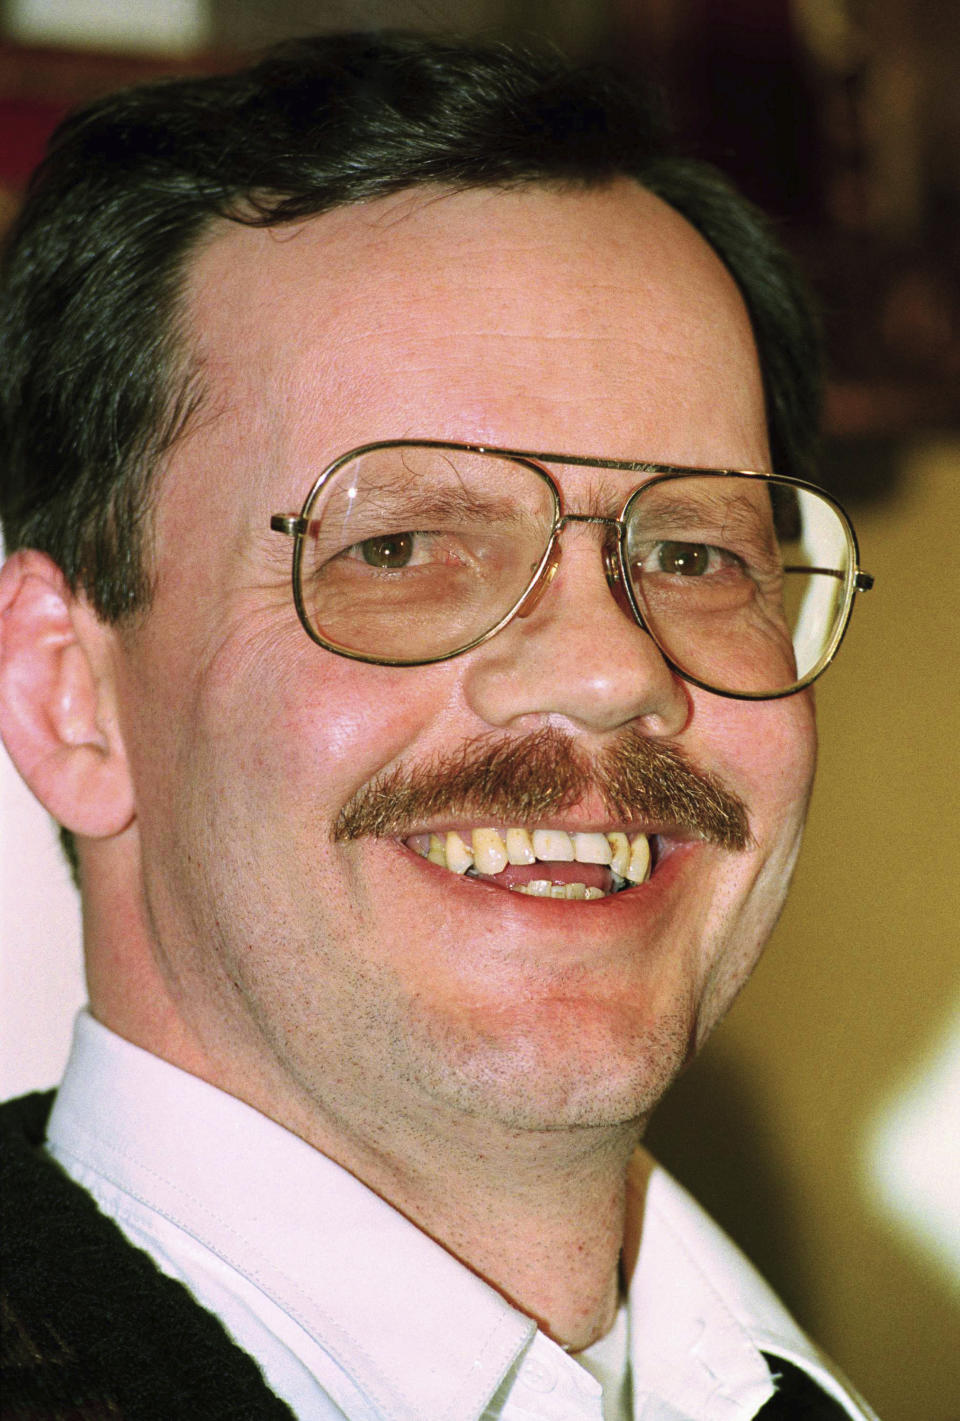 FILE - Former hostage Terry Anderson, the Associated Press chief Middle East correspondent, smiles during a news conference despite his broken glasses, Dec. 6, 1991, in Damascus, Syria. Anderson, the globe-trotting Associated Press correspondent who became one of America’s longest-held hostages after he was snatched from a street in war-torn Lebanon in 1985 and held for nearly seven years, died Sunday, April 21, 2024, at age 76. (AP Photo/Santiago Lyon, File)